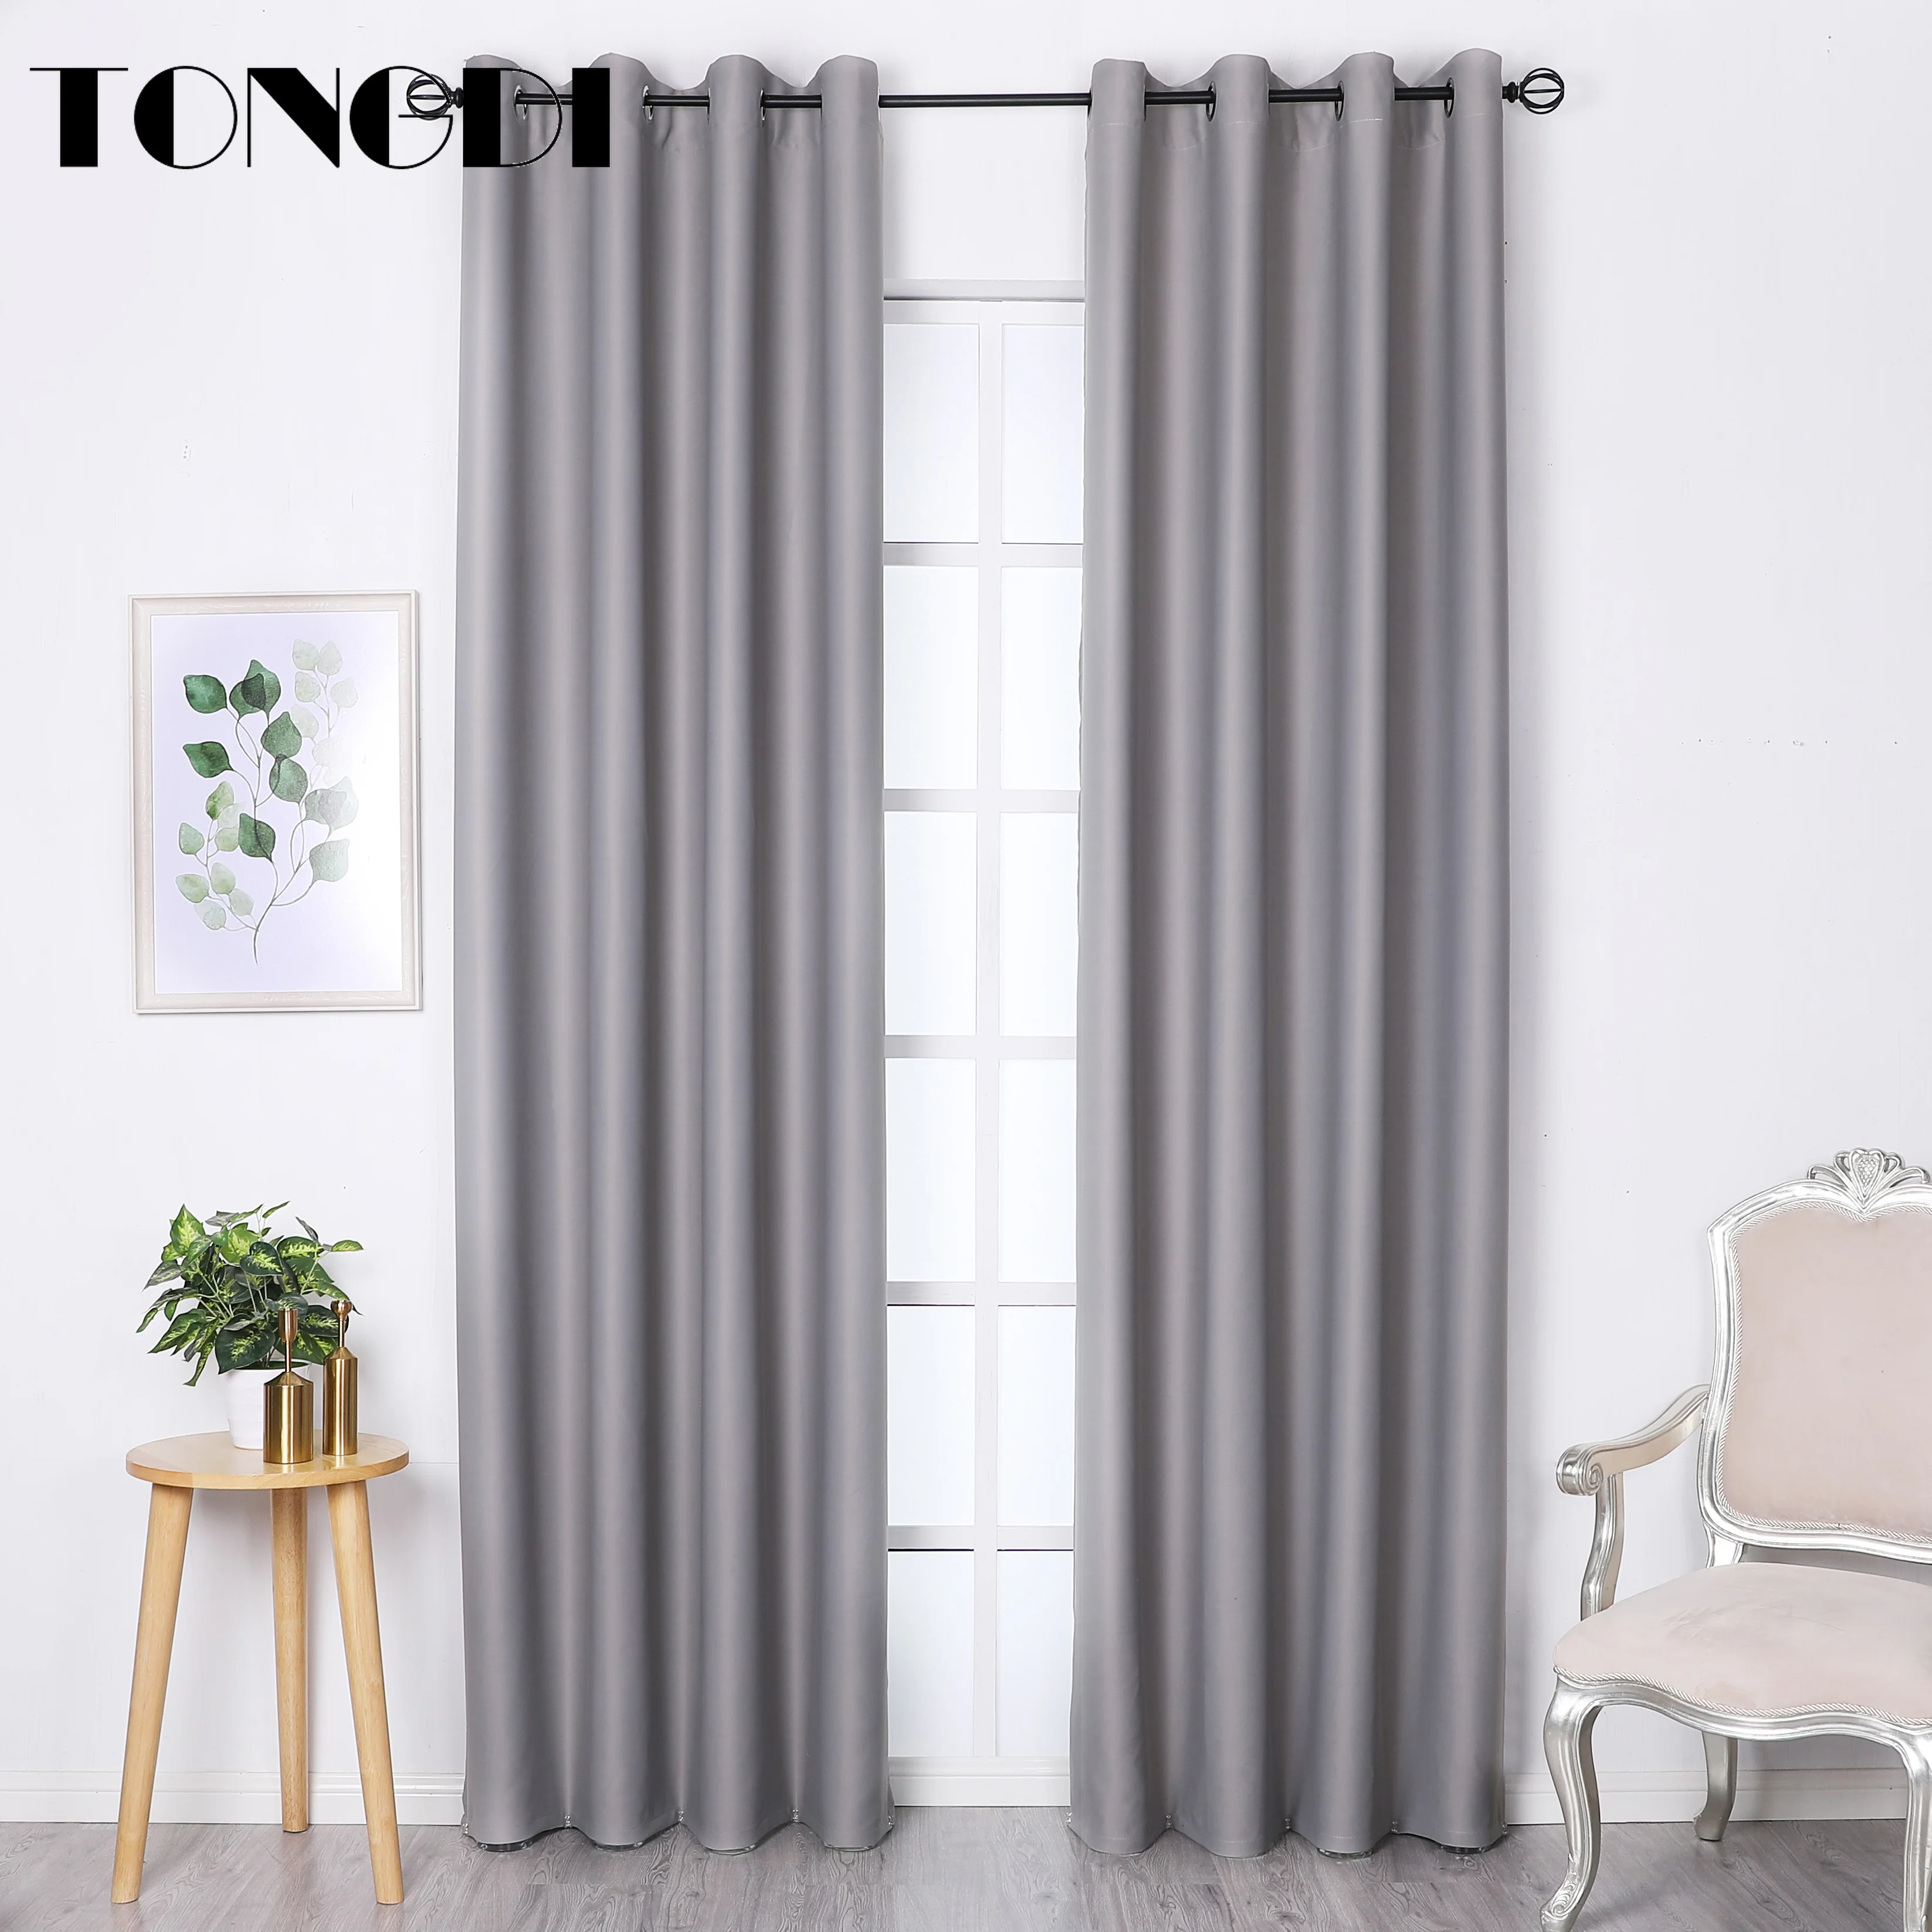 

TONGDI Modern Blackout Curtain Soft Shading Elegant Solid Color Luxury Decoration For Parlour Bedroom Living Room Window Panel